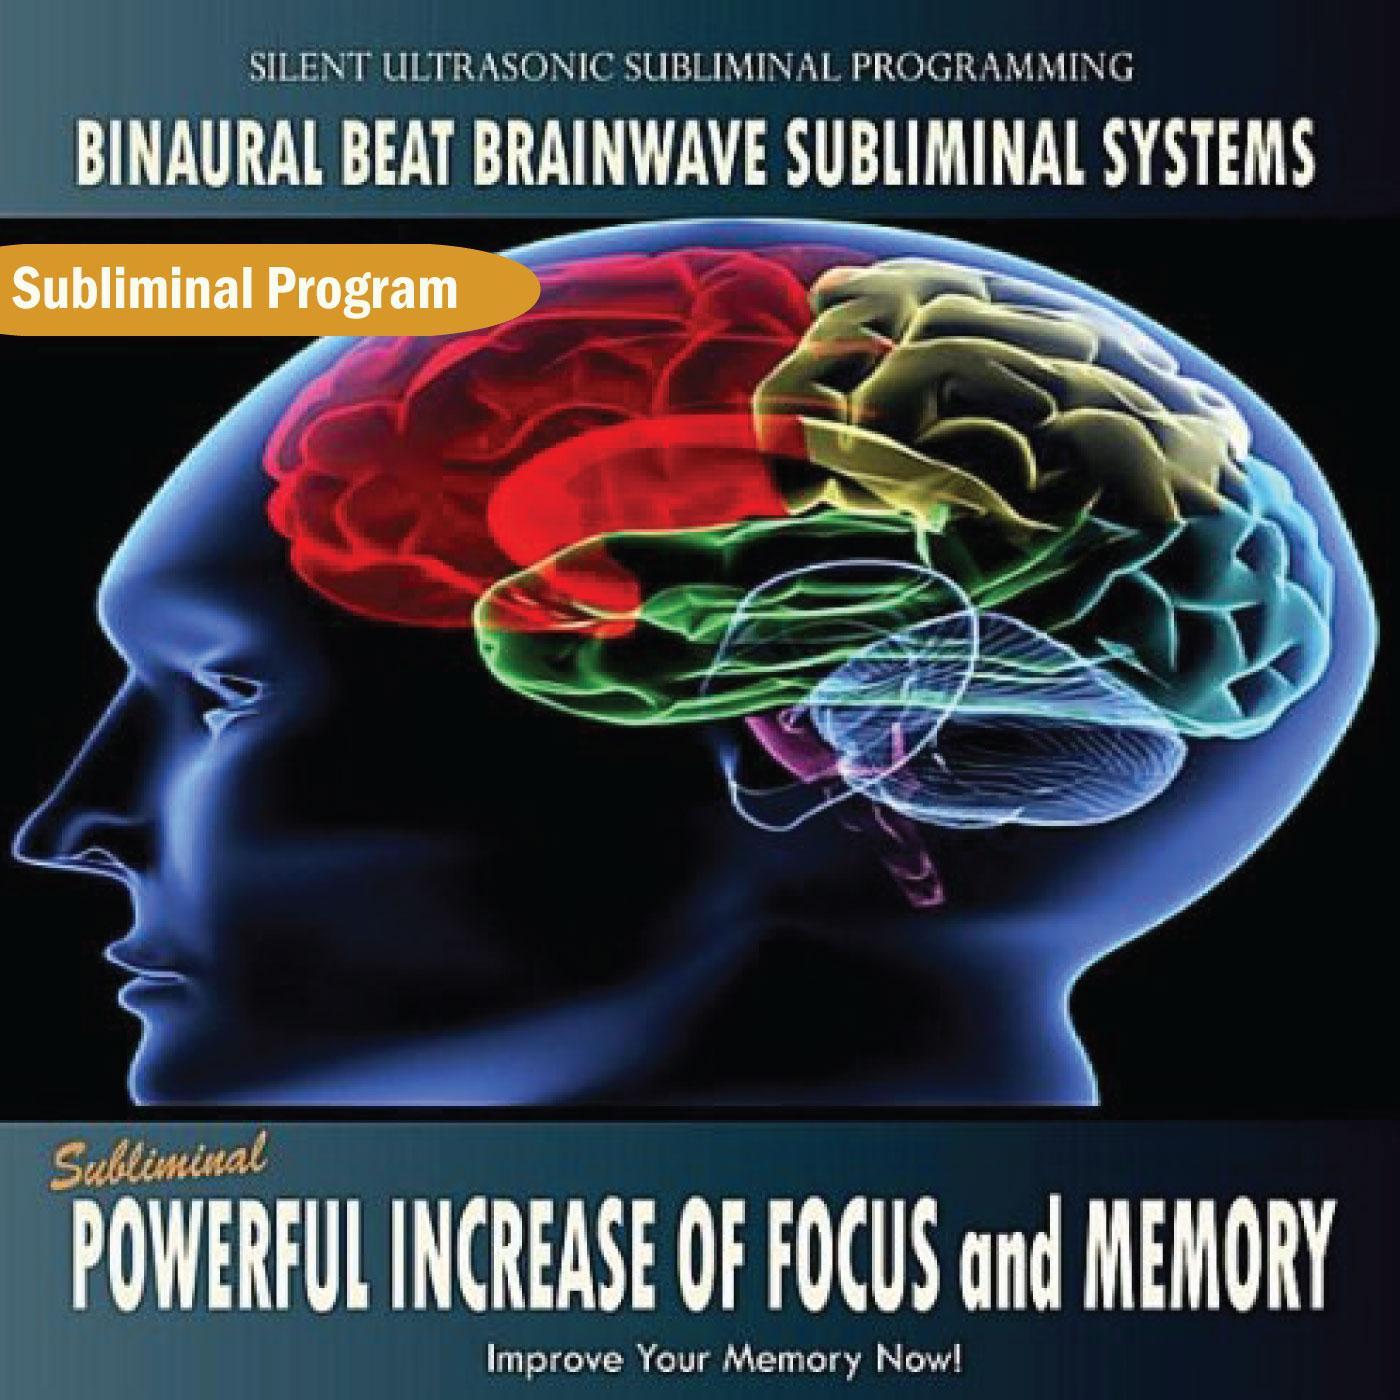 Subliminal Powerful Increase of Focus and Memory